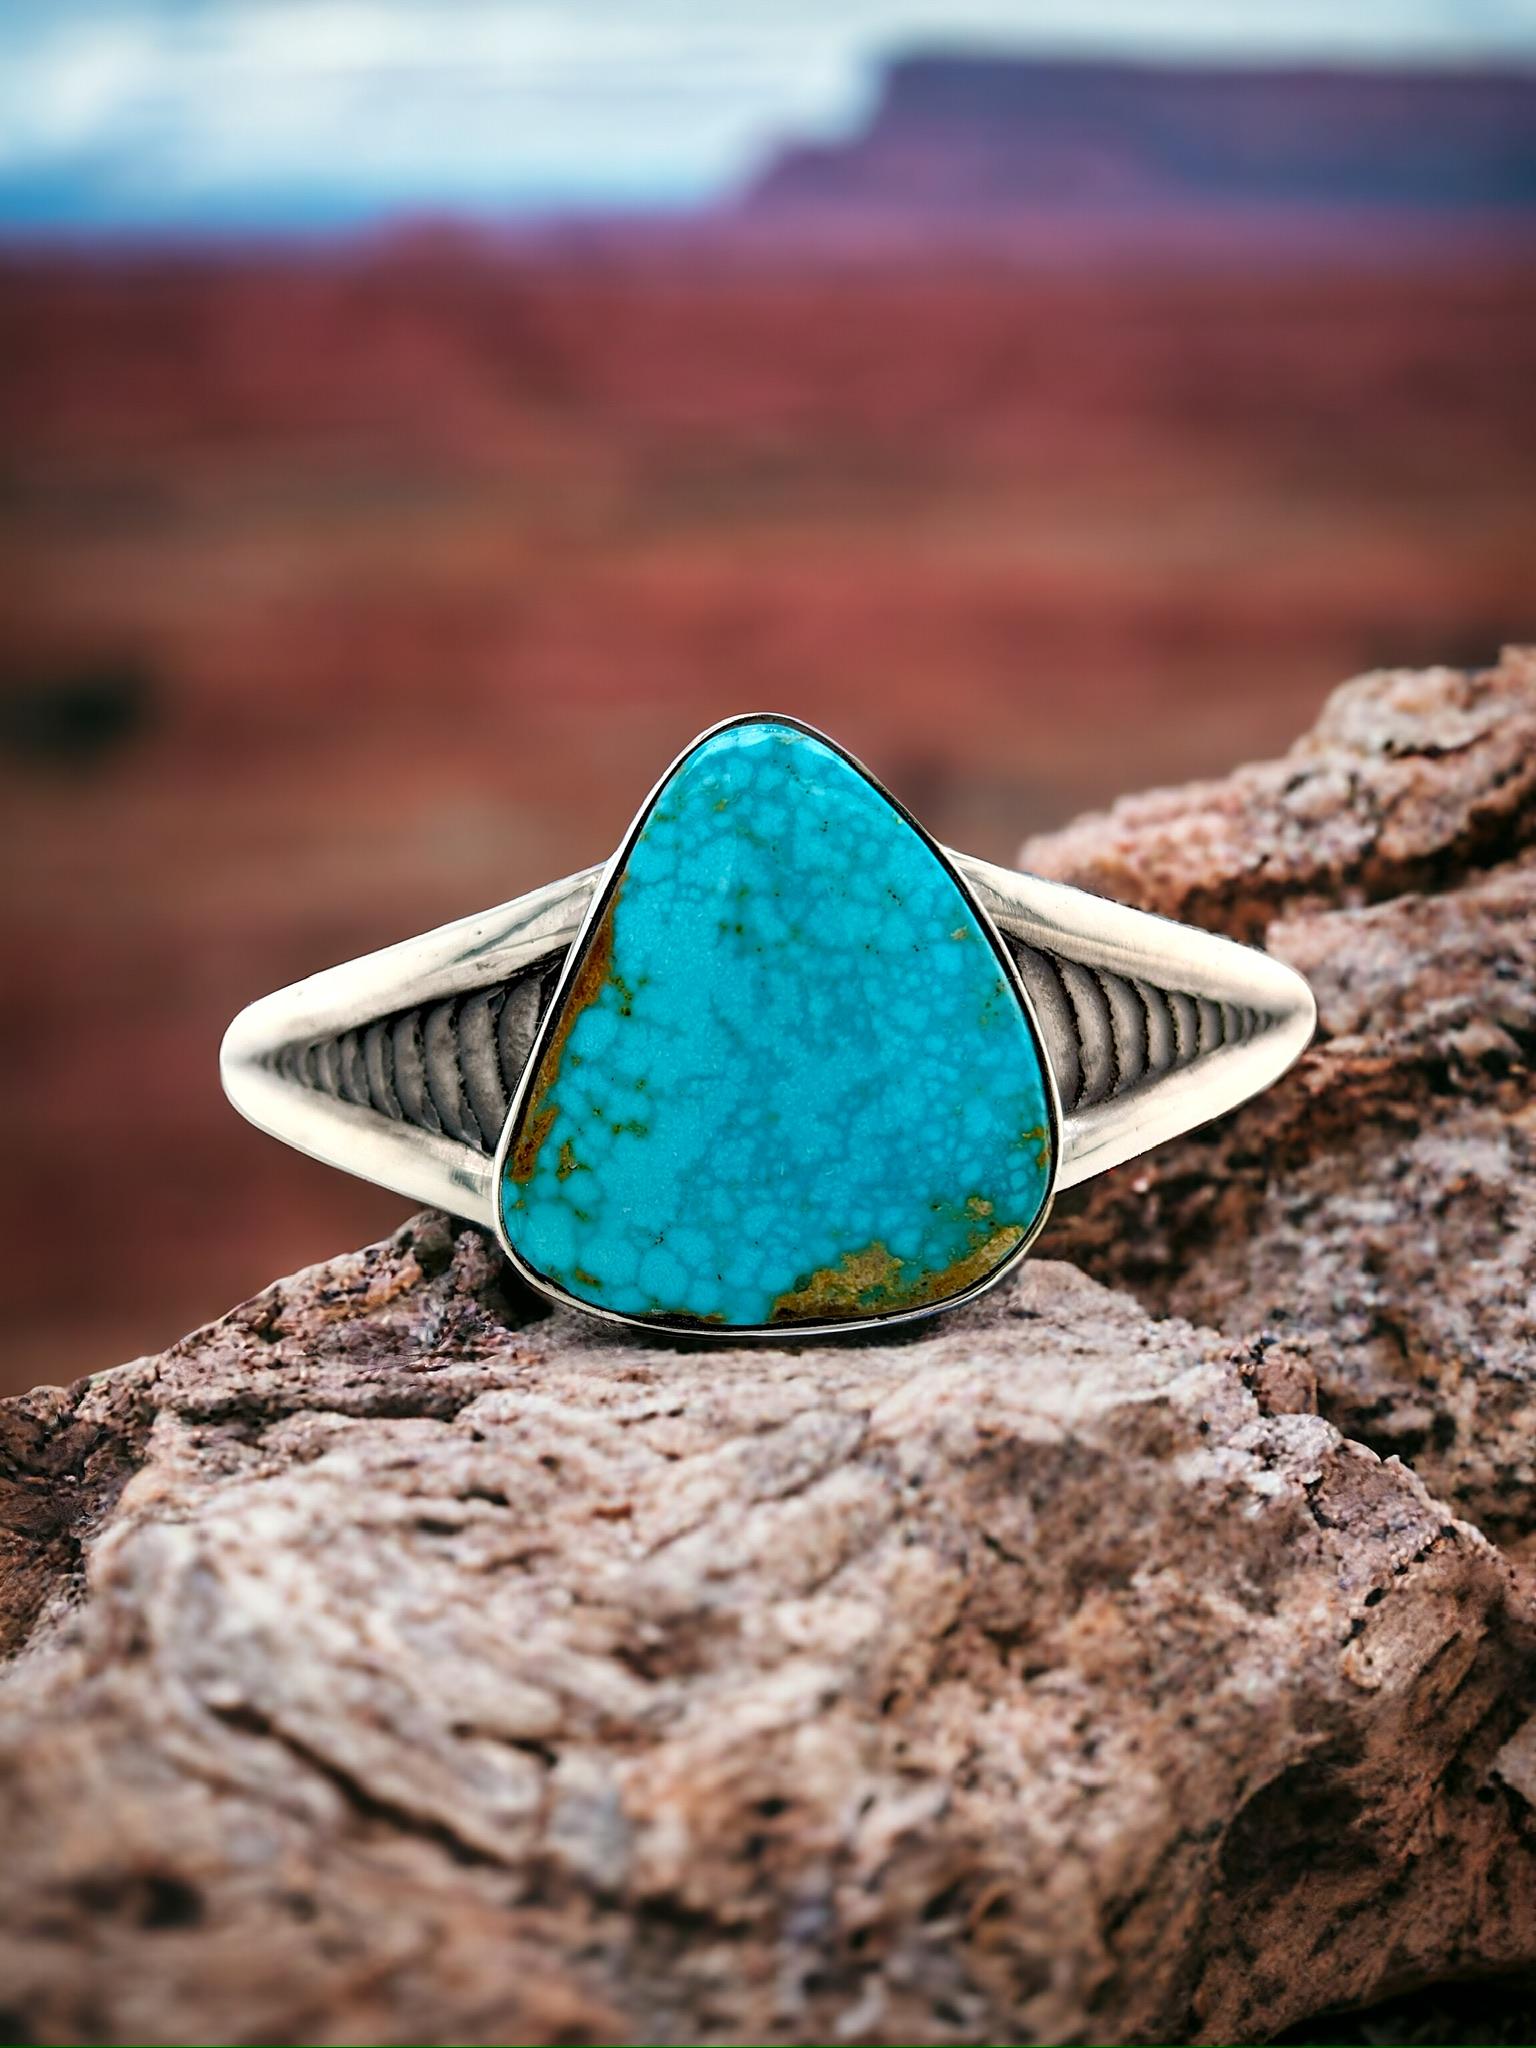 With this alluring Sterling Silver Cuff Bracelet, embrace the artistic beauty of the natural world. This one-of-a-kind piece showcases a real Kingman turquoise gemstone, renowned for its captivating matrix patterns and captivating depth of